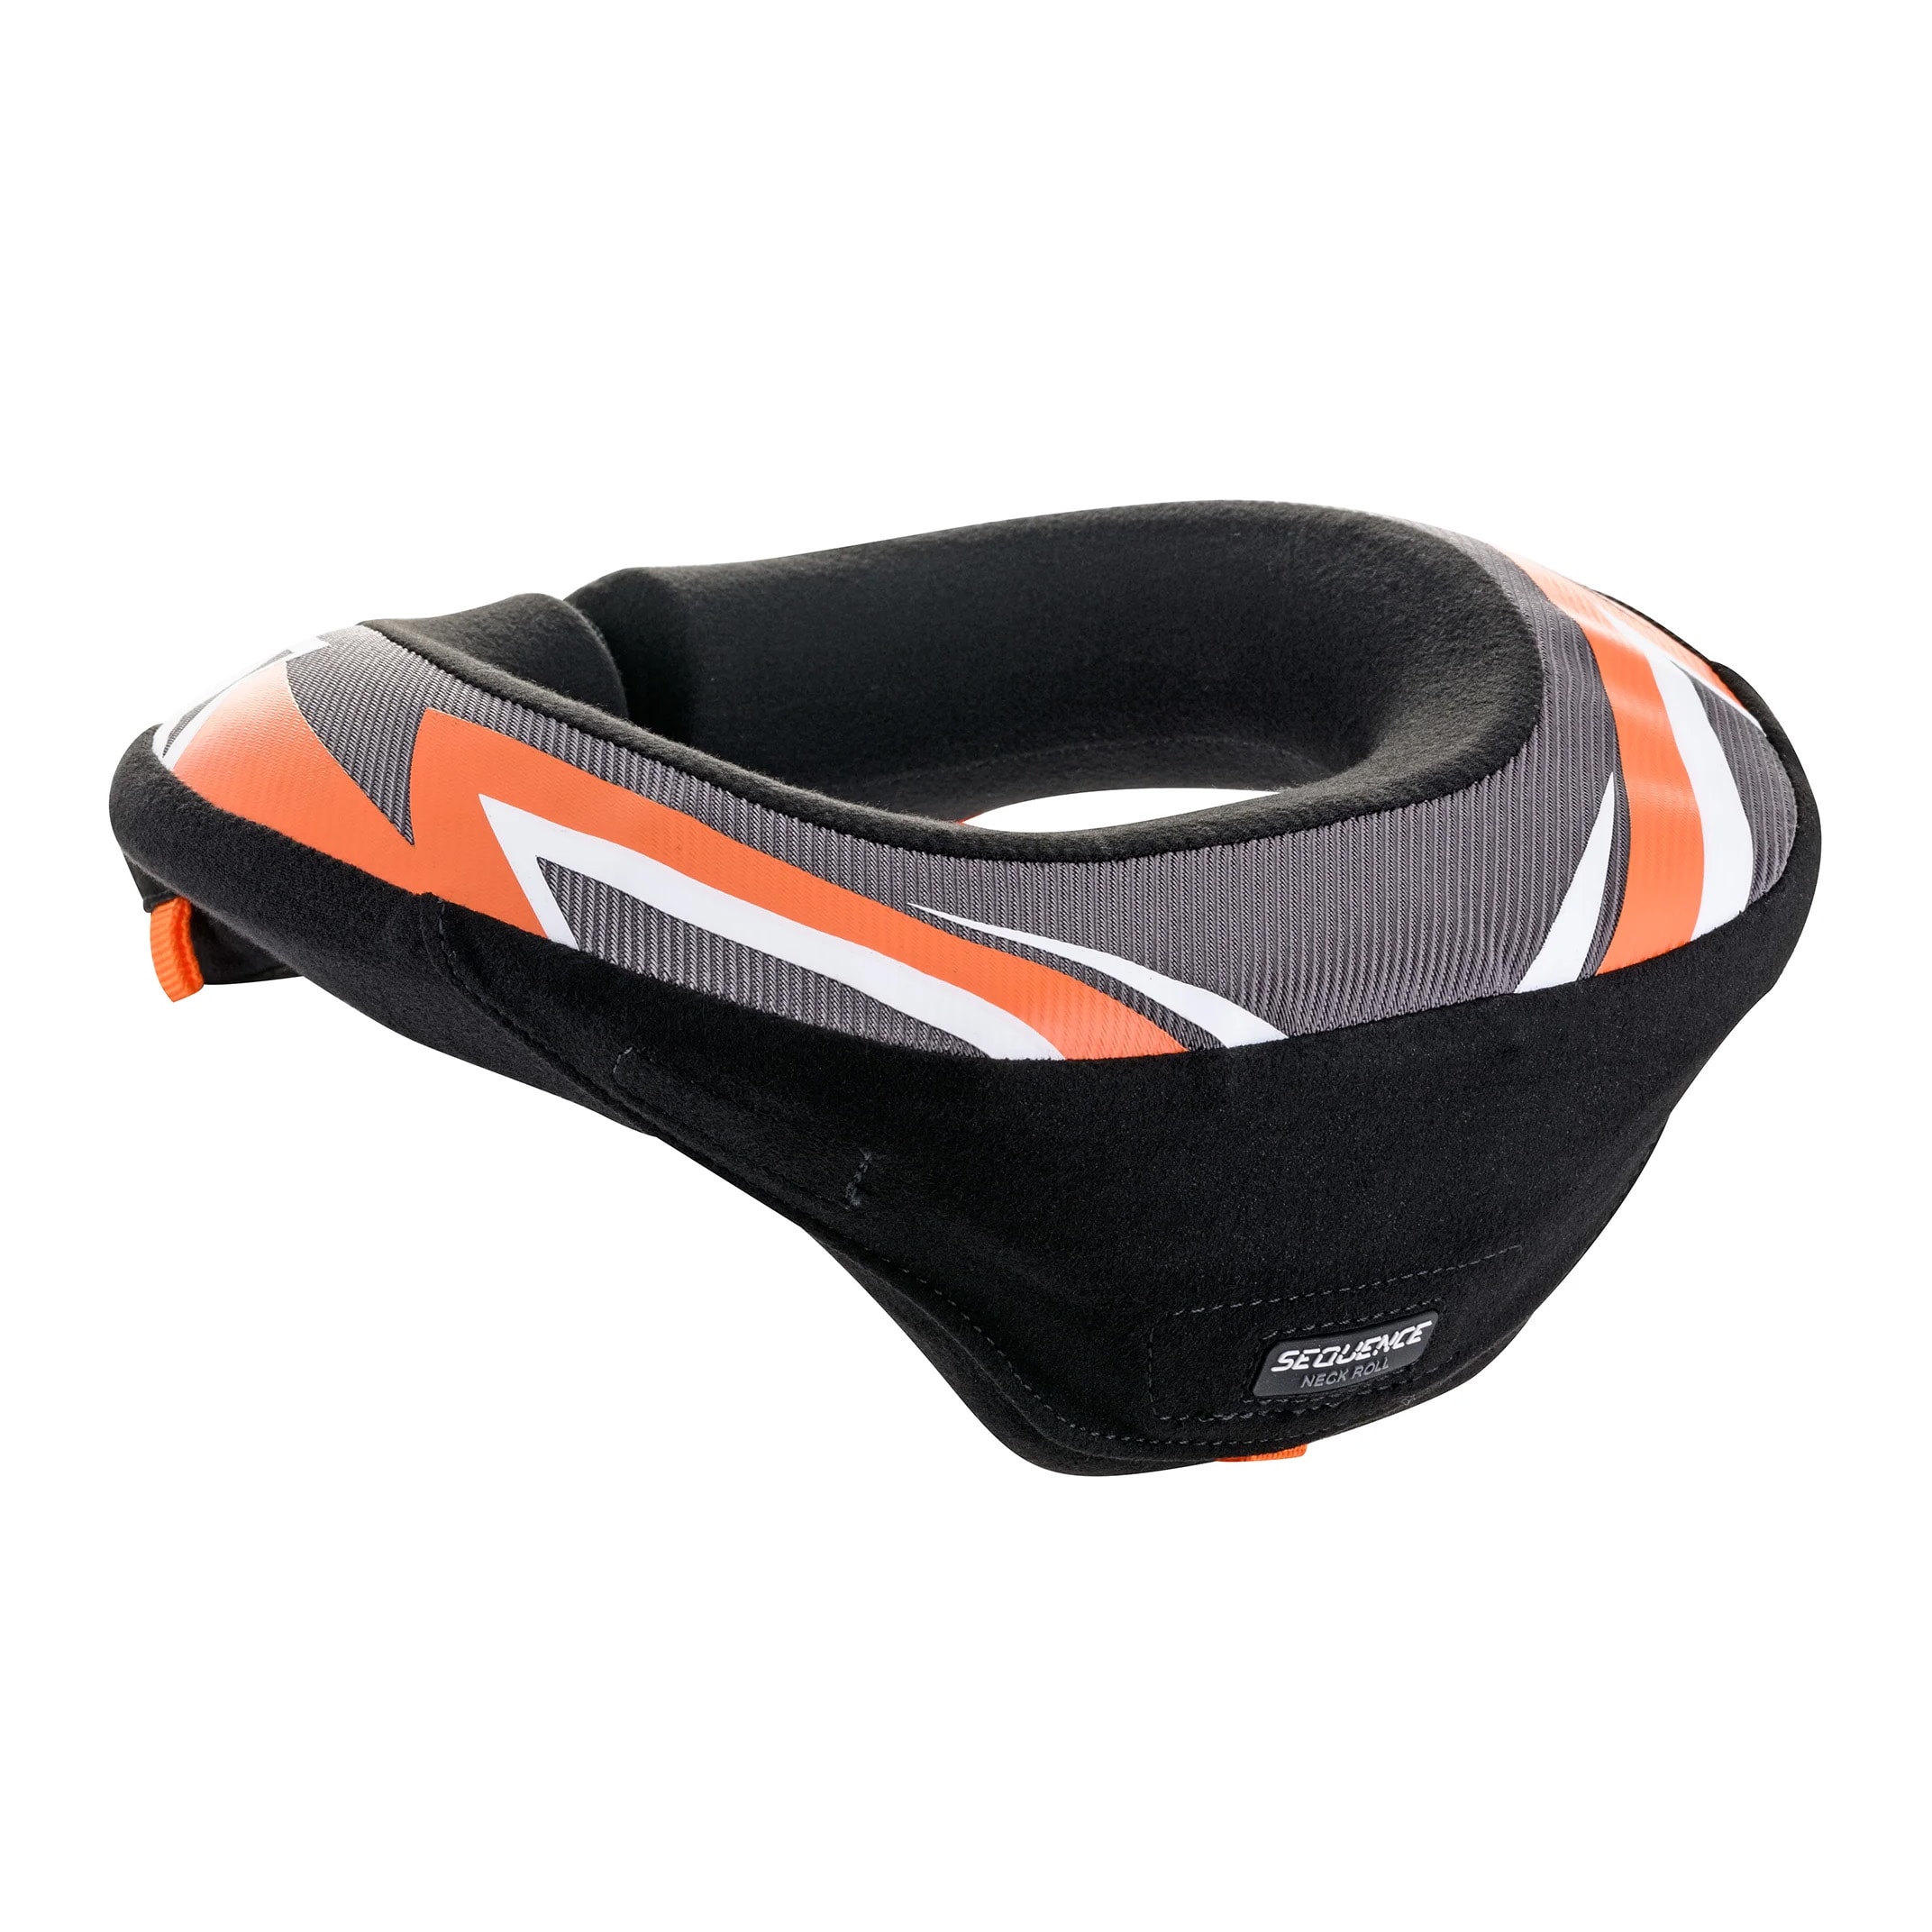 Neckprotection Sequence Youth Black/Orange